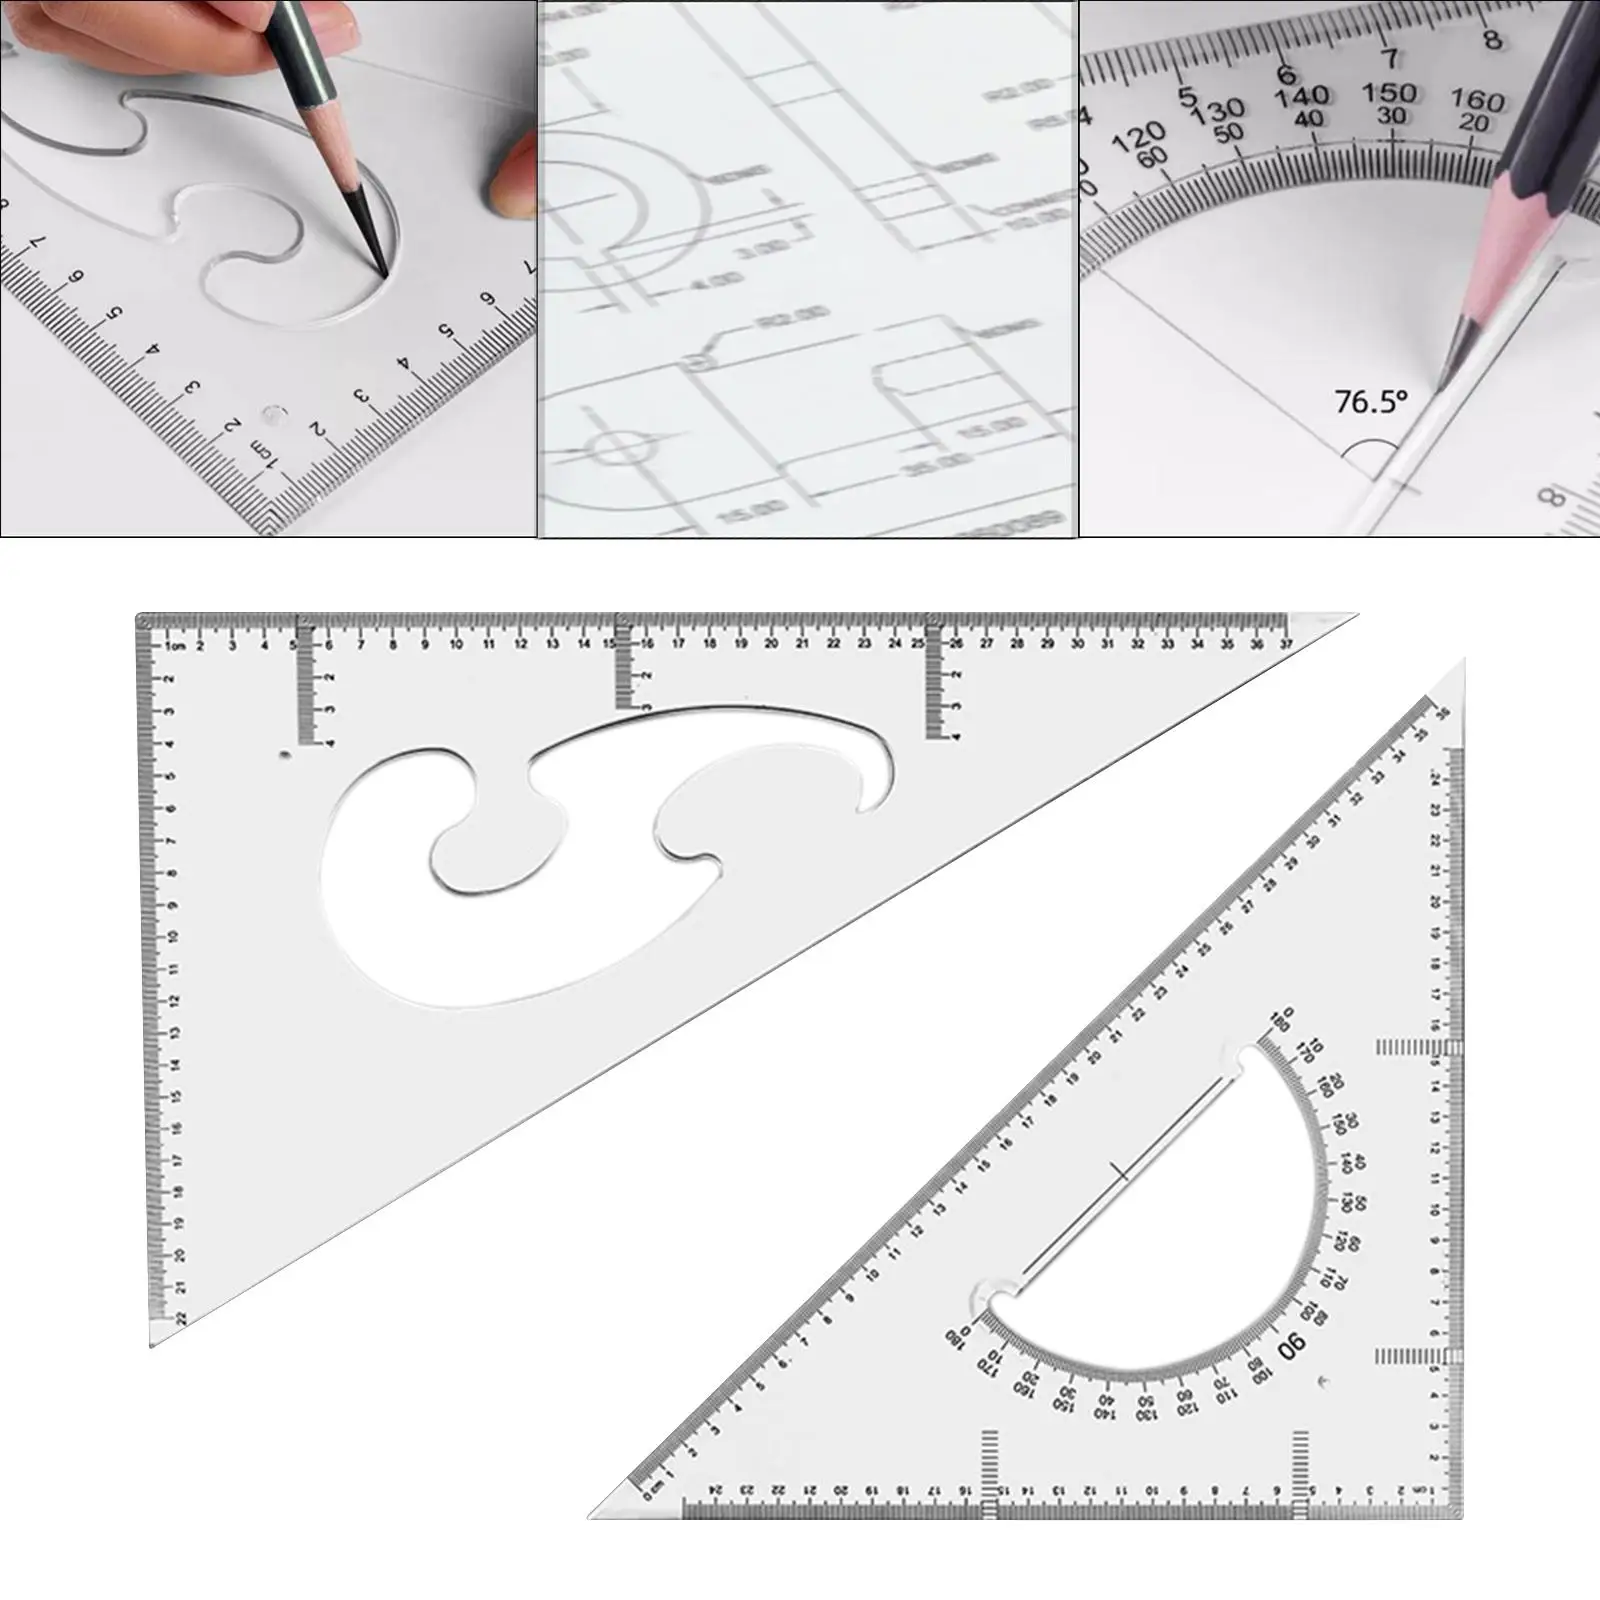 2x Triangle Ruler Square Multipurpose Professional Transparent Measuring Ruler for Carpentry Engineering Artists Design Drafting